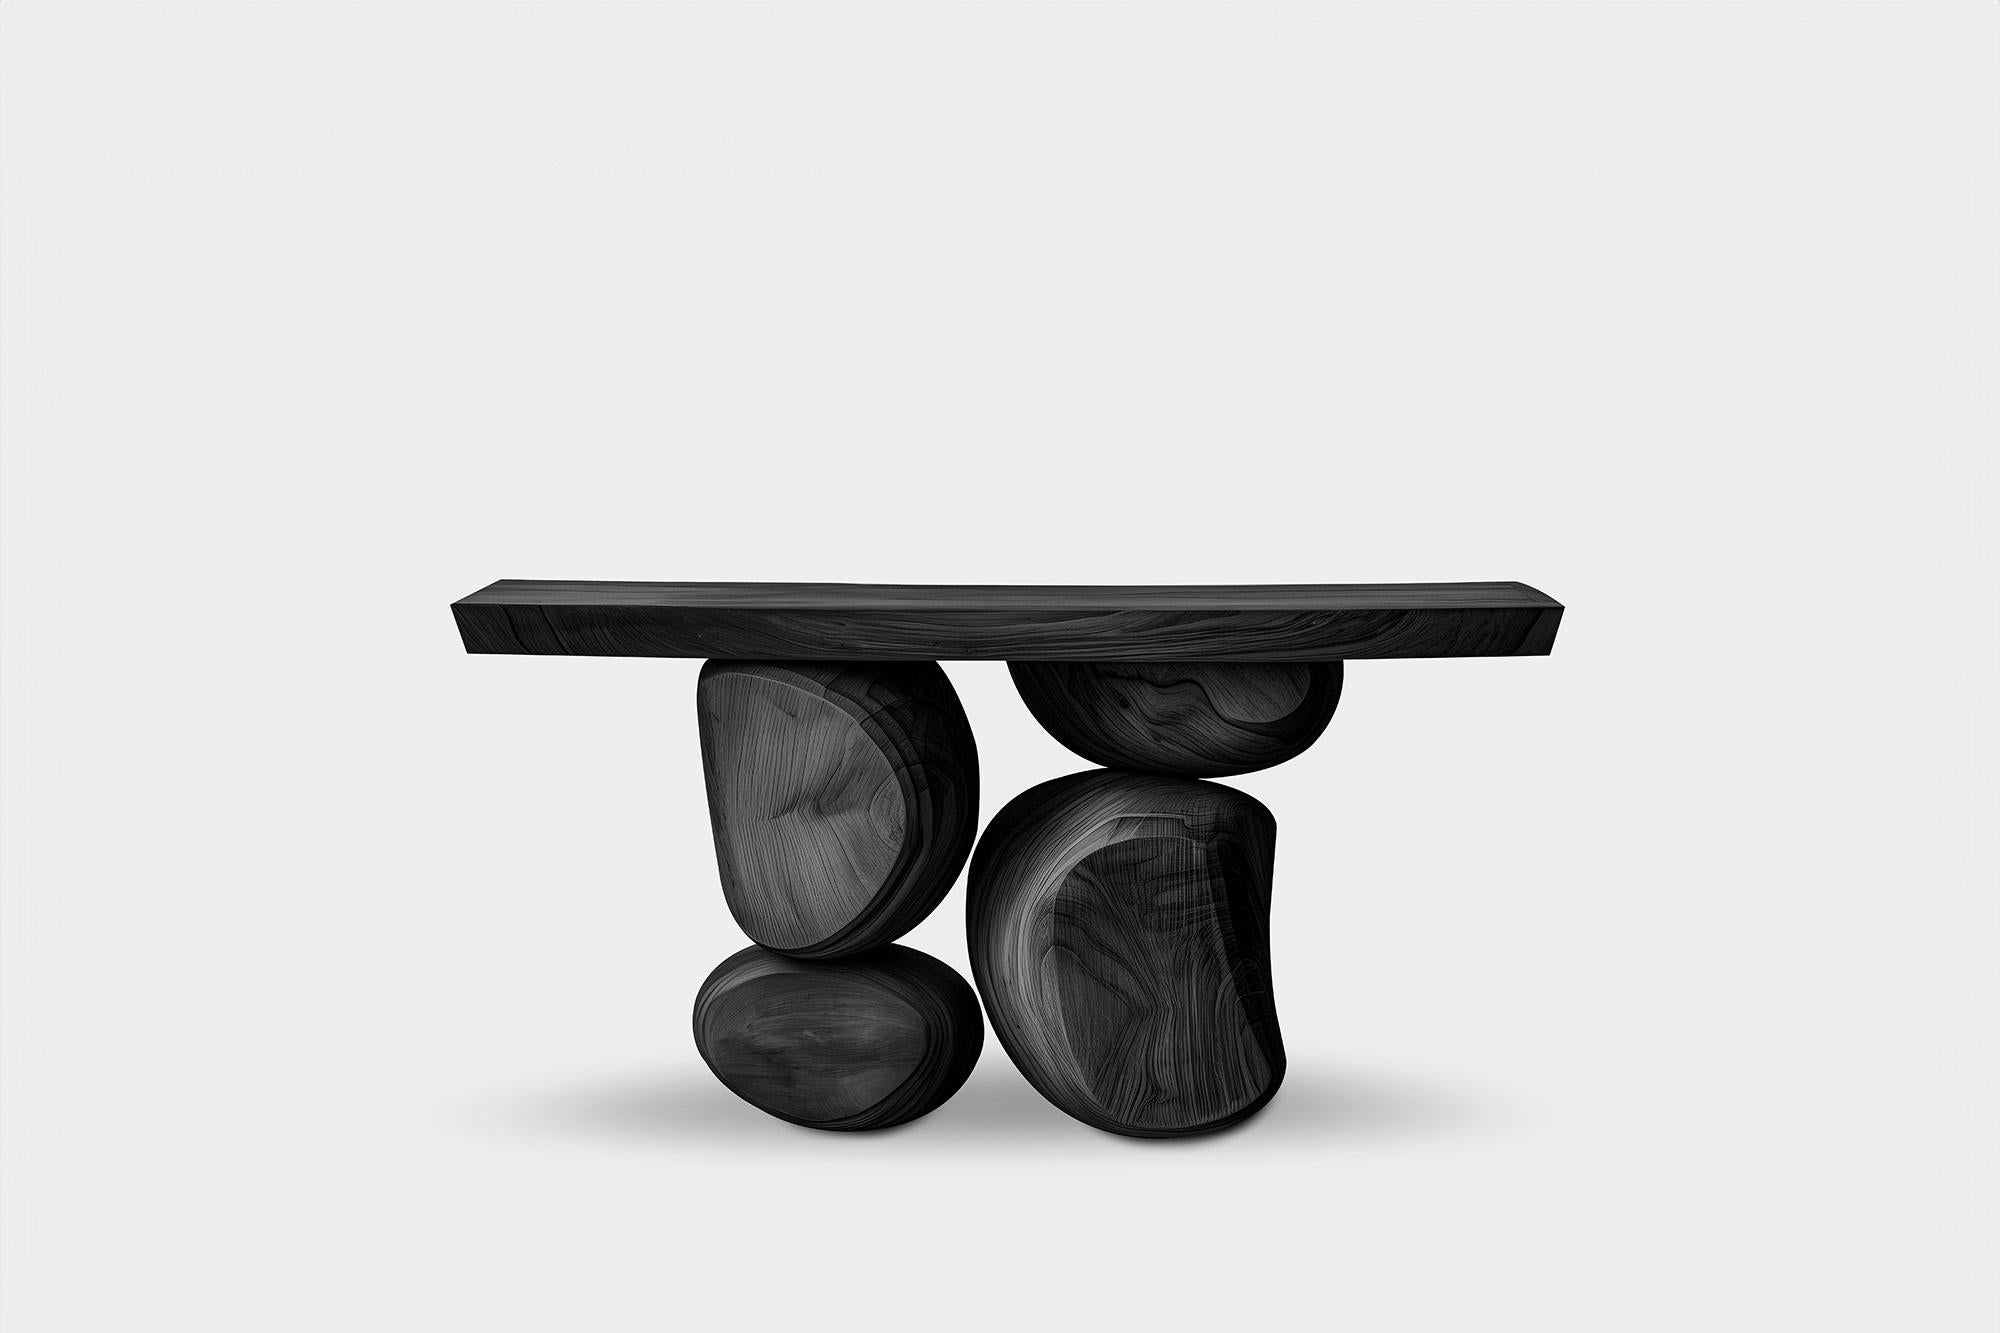 Joel Escalona's Elefante Console Table 33, Layered Wood, Dynamic Shape

—————————————————————
Elefante Collection: A Harmony of Design and Heritage by NONO

Crafting Elegance with a Modernist Touch

NONO, renowned for its decade-long journey in